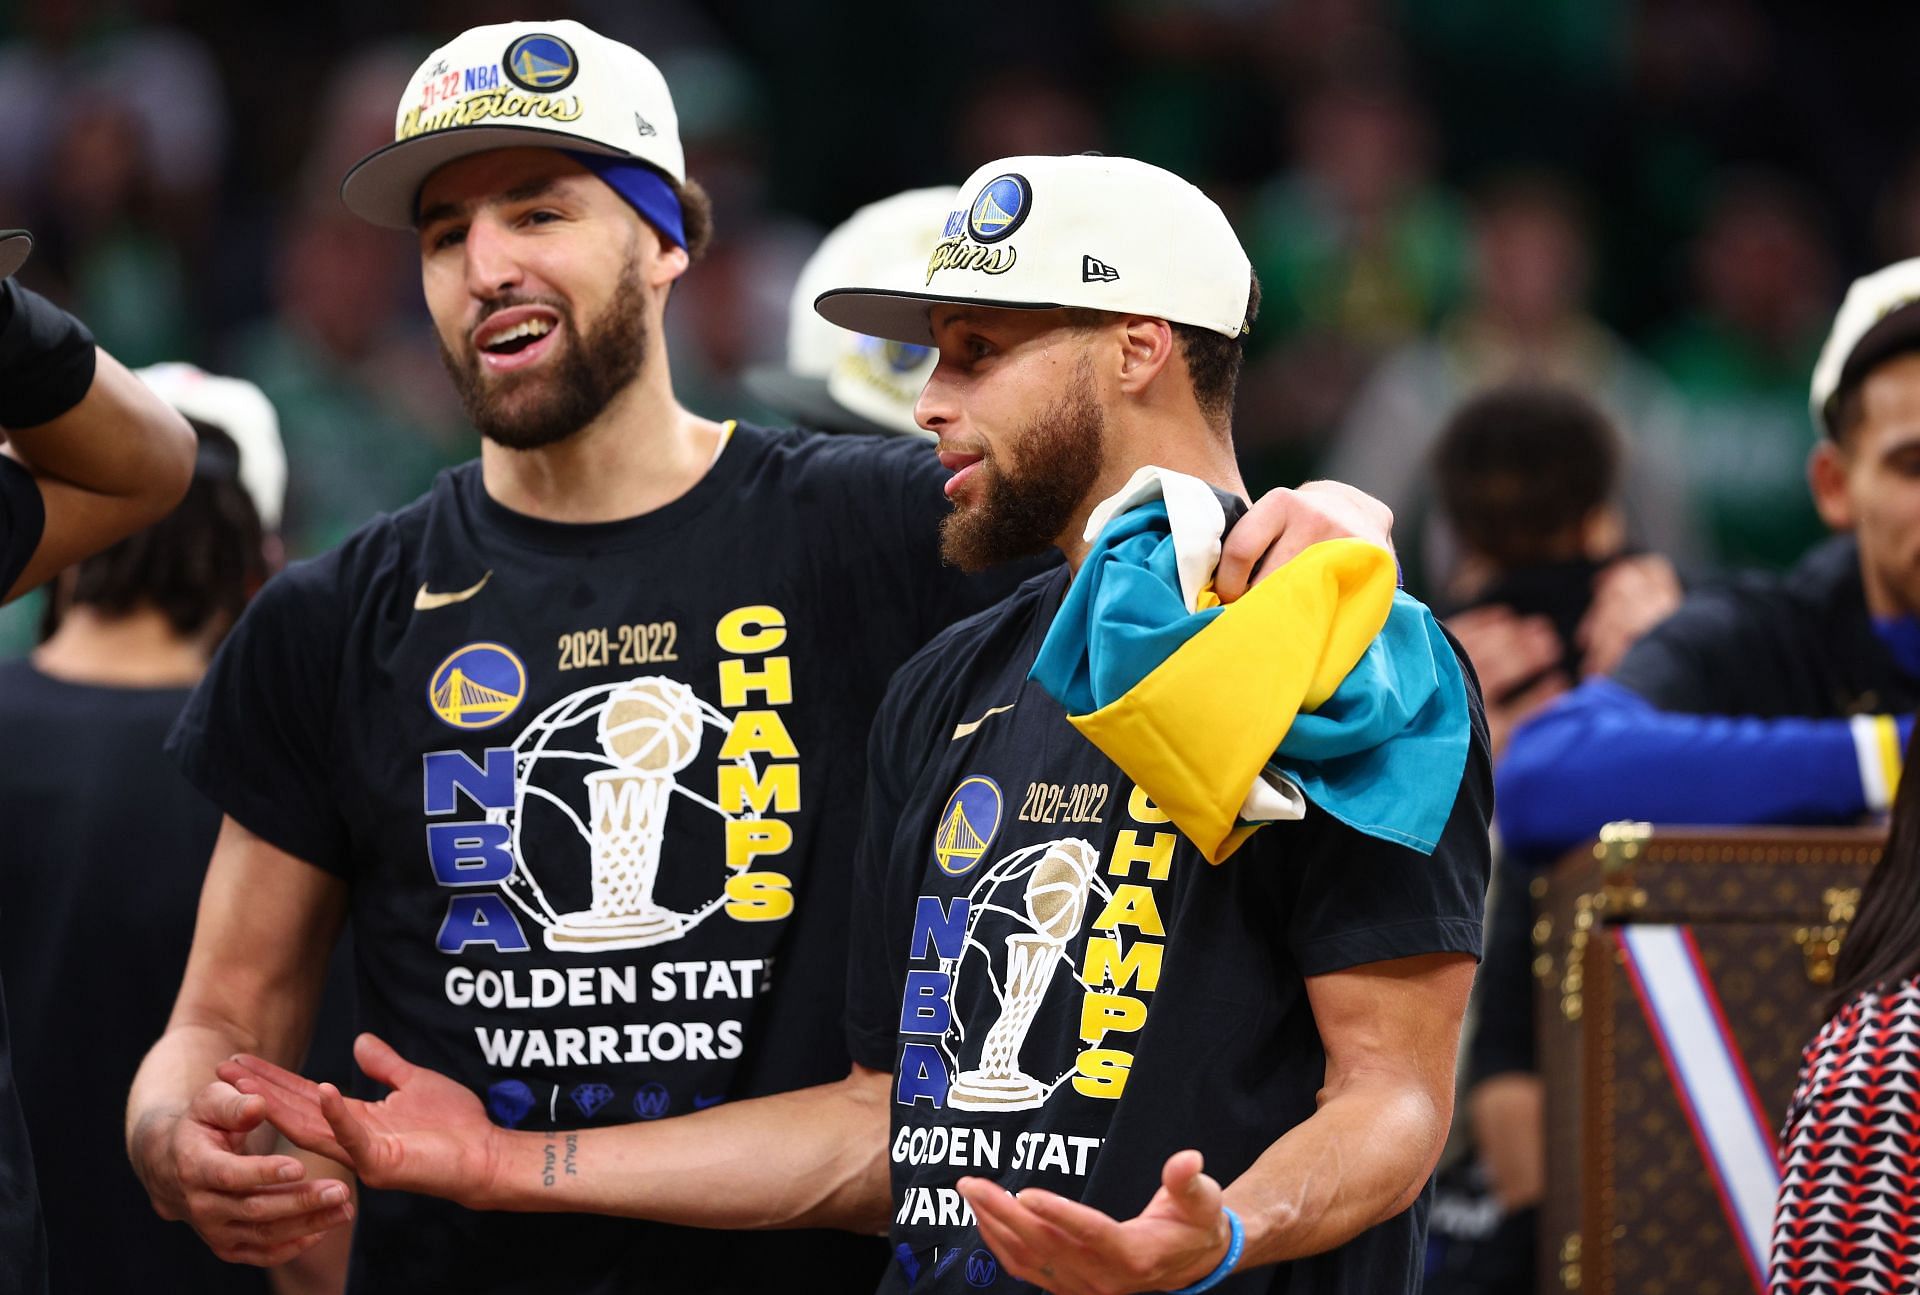 Golden State Warriors stars Steph Curry and Klay Thompson at 2022 NBA Finals